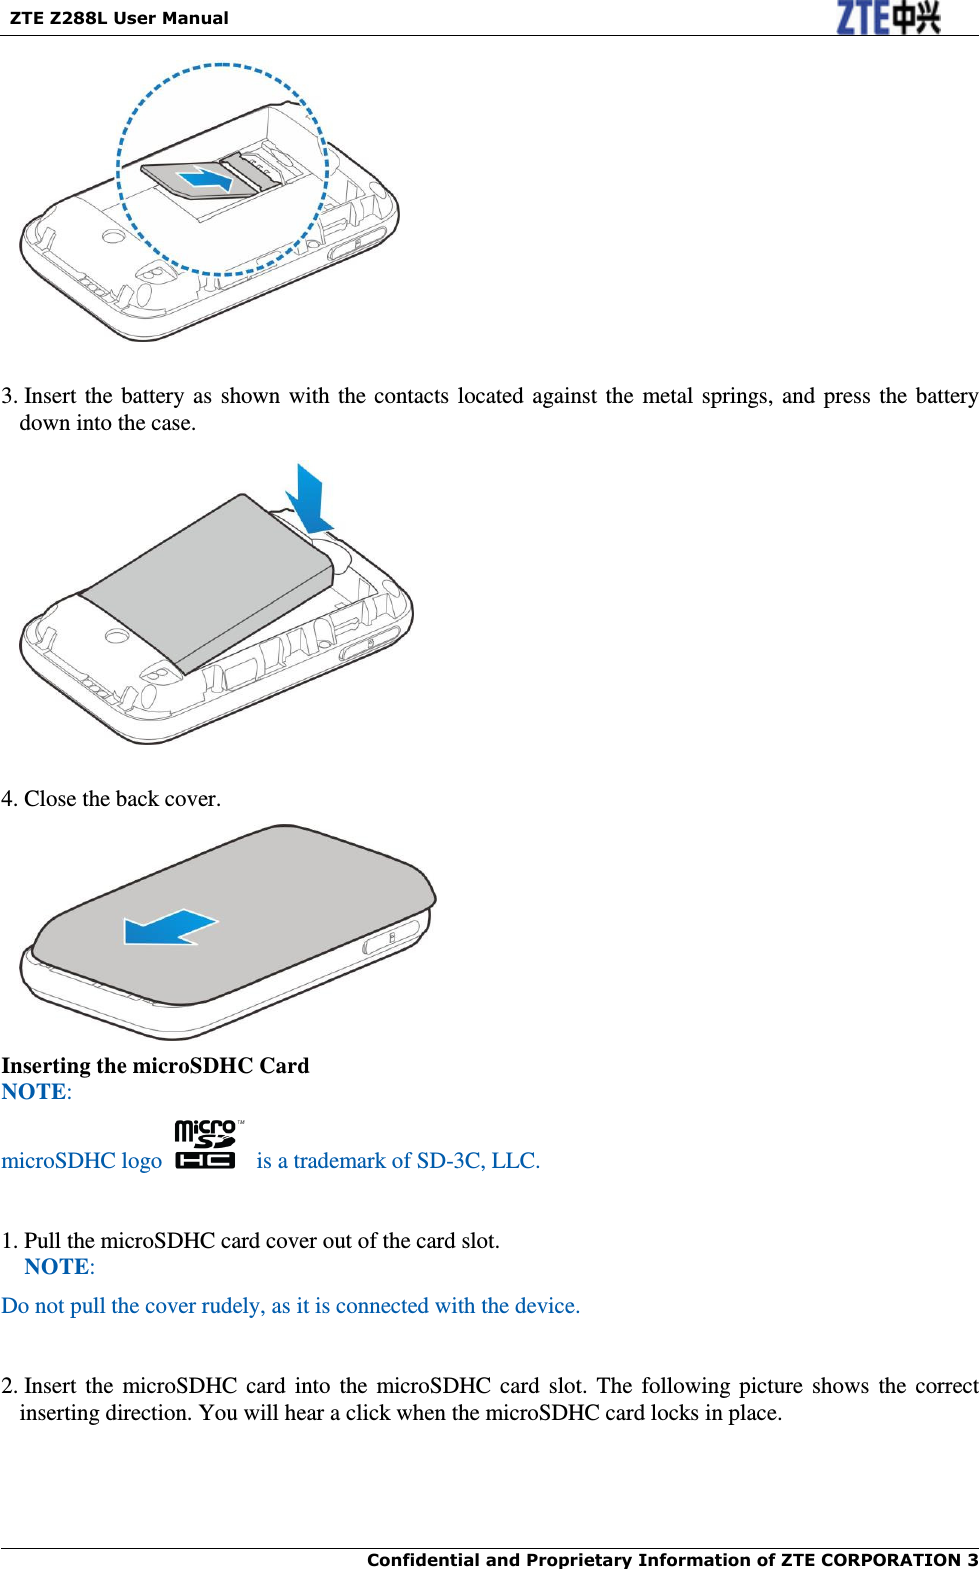   ZTE Z288L User Manual  Confidential and Proprietary Information of ZTE CORPORATION 3       3. Insert the battery as shown with the contacts located against the metal springs, and press the battery down into the case.    4. Close the back cover.  Inserting the microSDHC Card NOTE: microSDHC logo    is a trademark of SD-3C, LLC.  1. Pull the microSDHC card cover out of the card slot. NOTE: Do not pull the cover rudely, as it is connected with the device.     2. Insert the  microSDHC card into the microSDHC card  slot. The following picture  shows the  correct inserting direction. You will hear a click when the microSDHC card locks in place. 